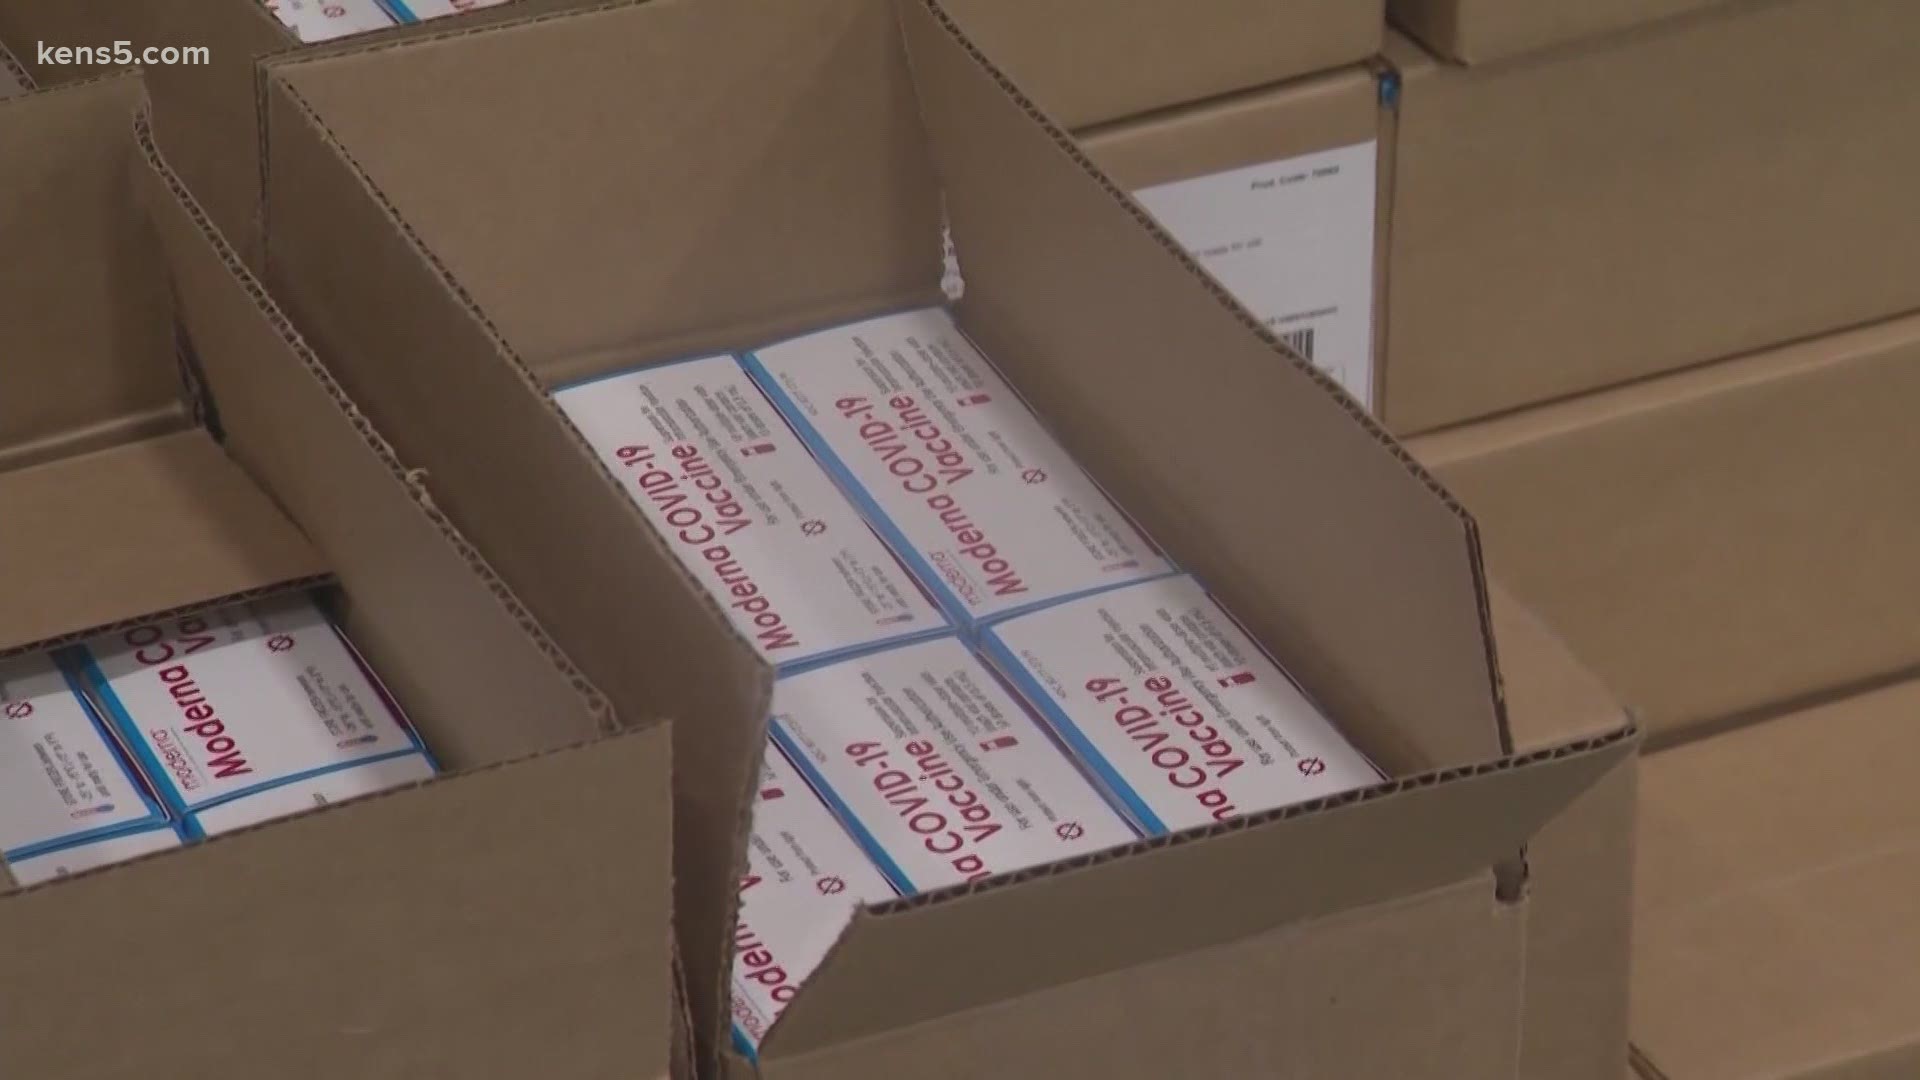 More than 60,000 doses of the new Moderna vaccine are expected to be delivered to Texas.